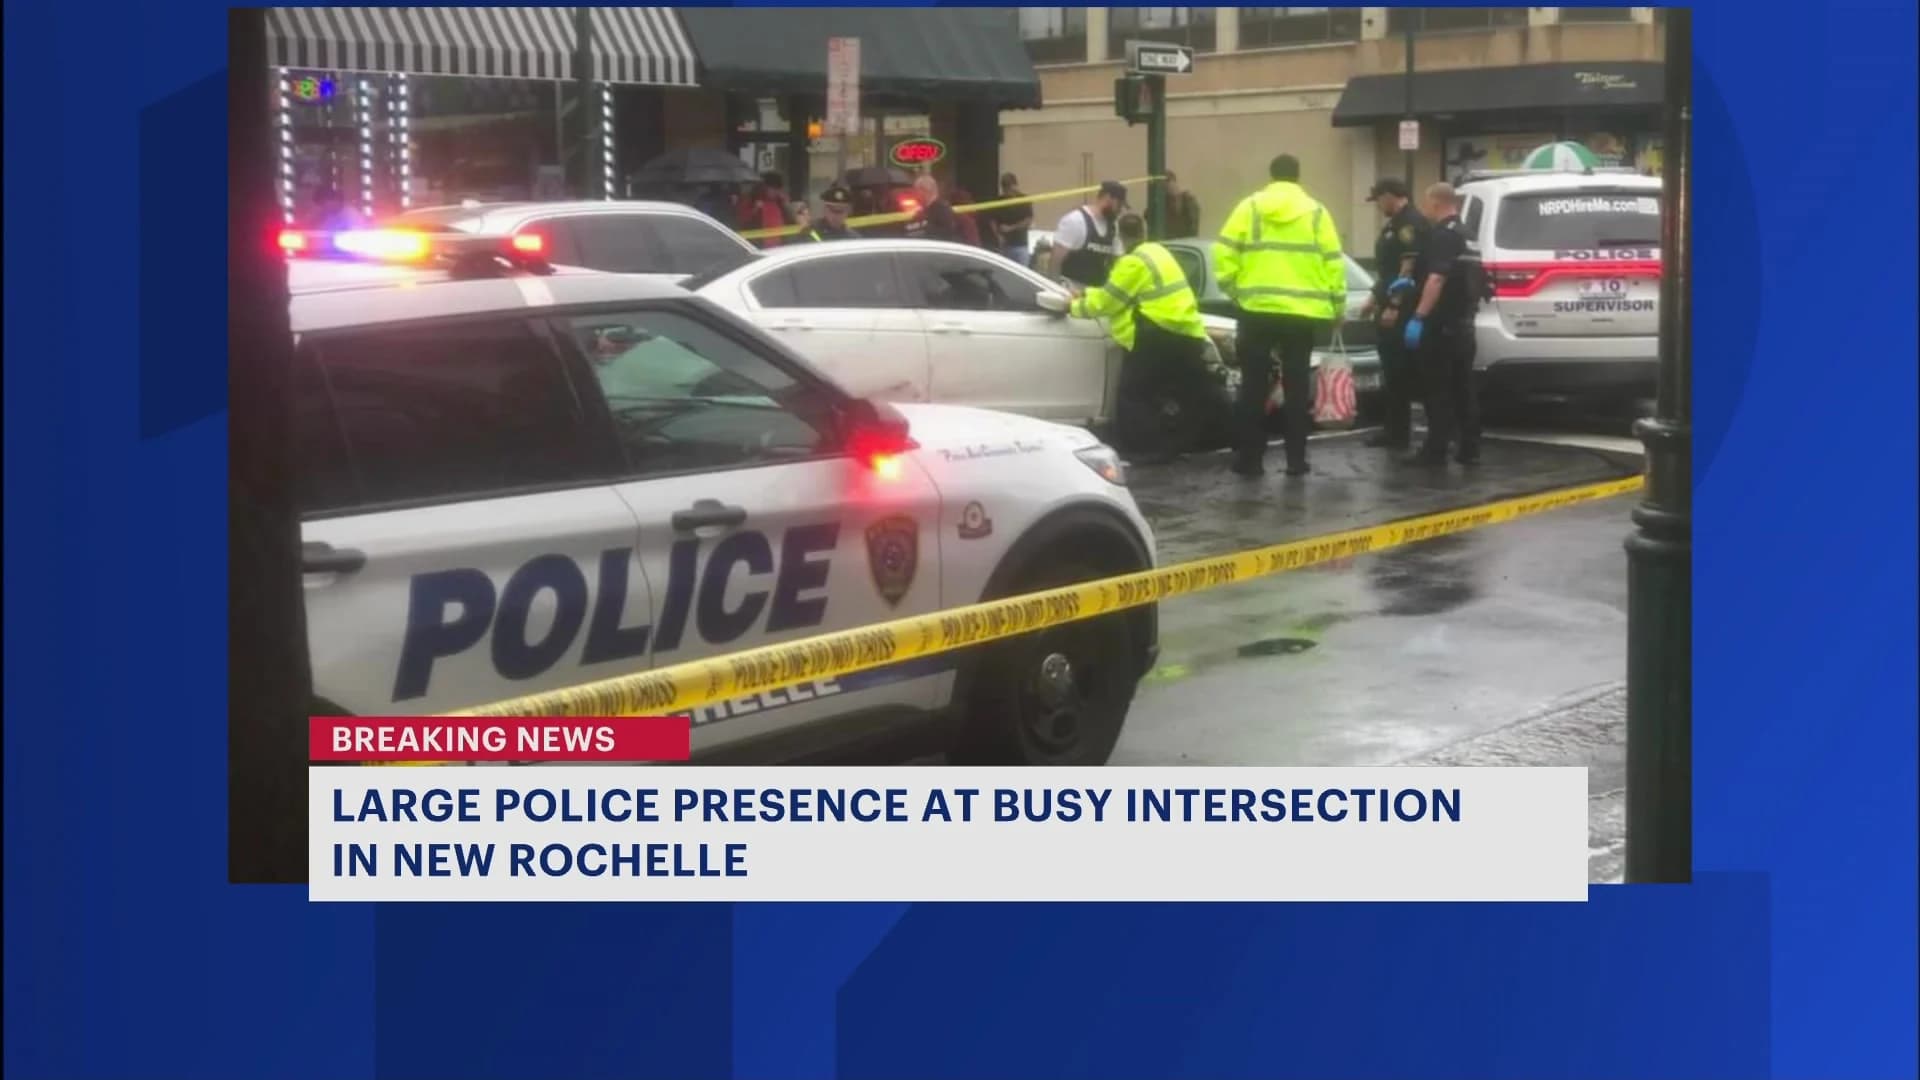 Large police presence descends at busy New Rochelle intersection